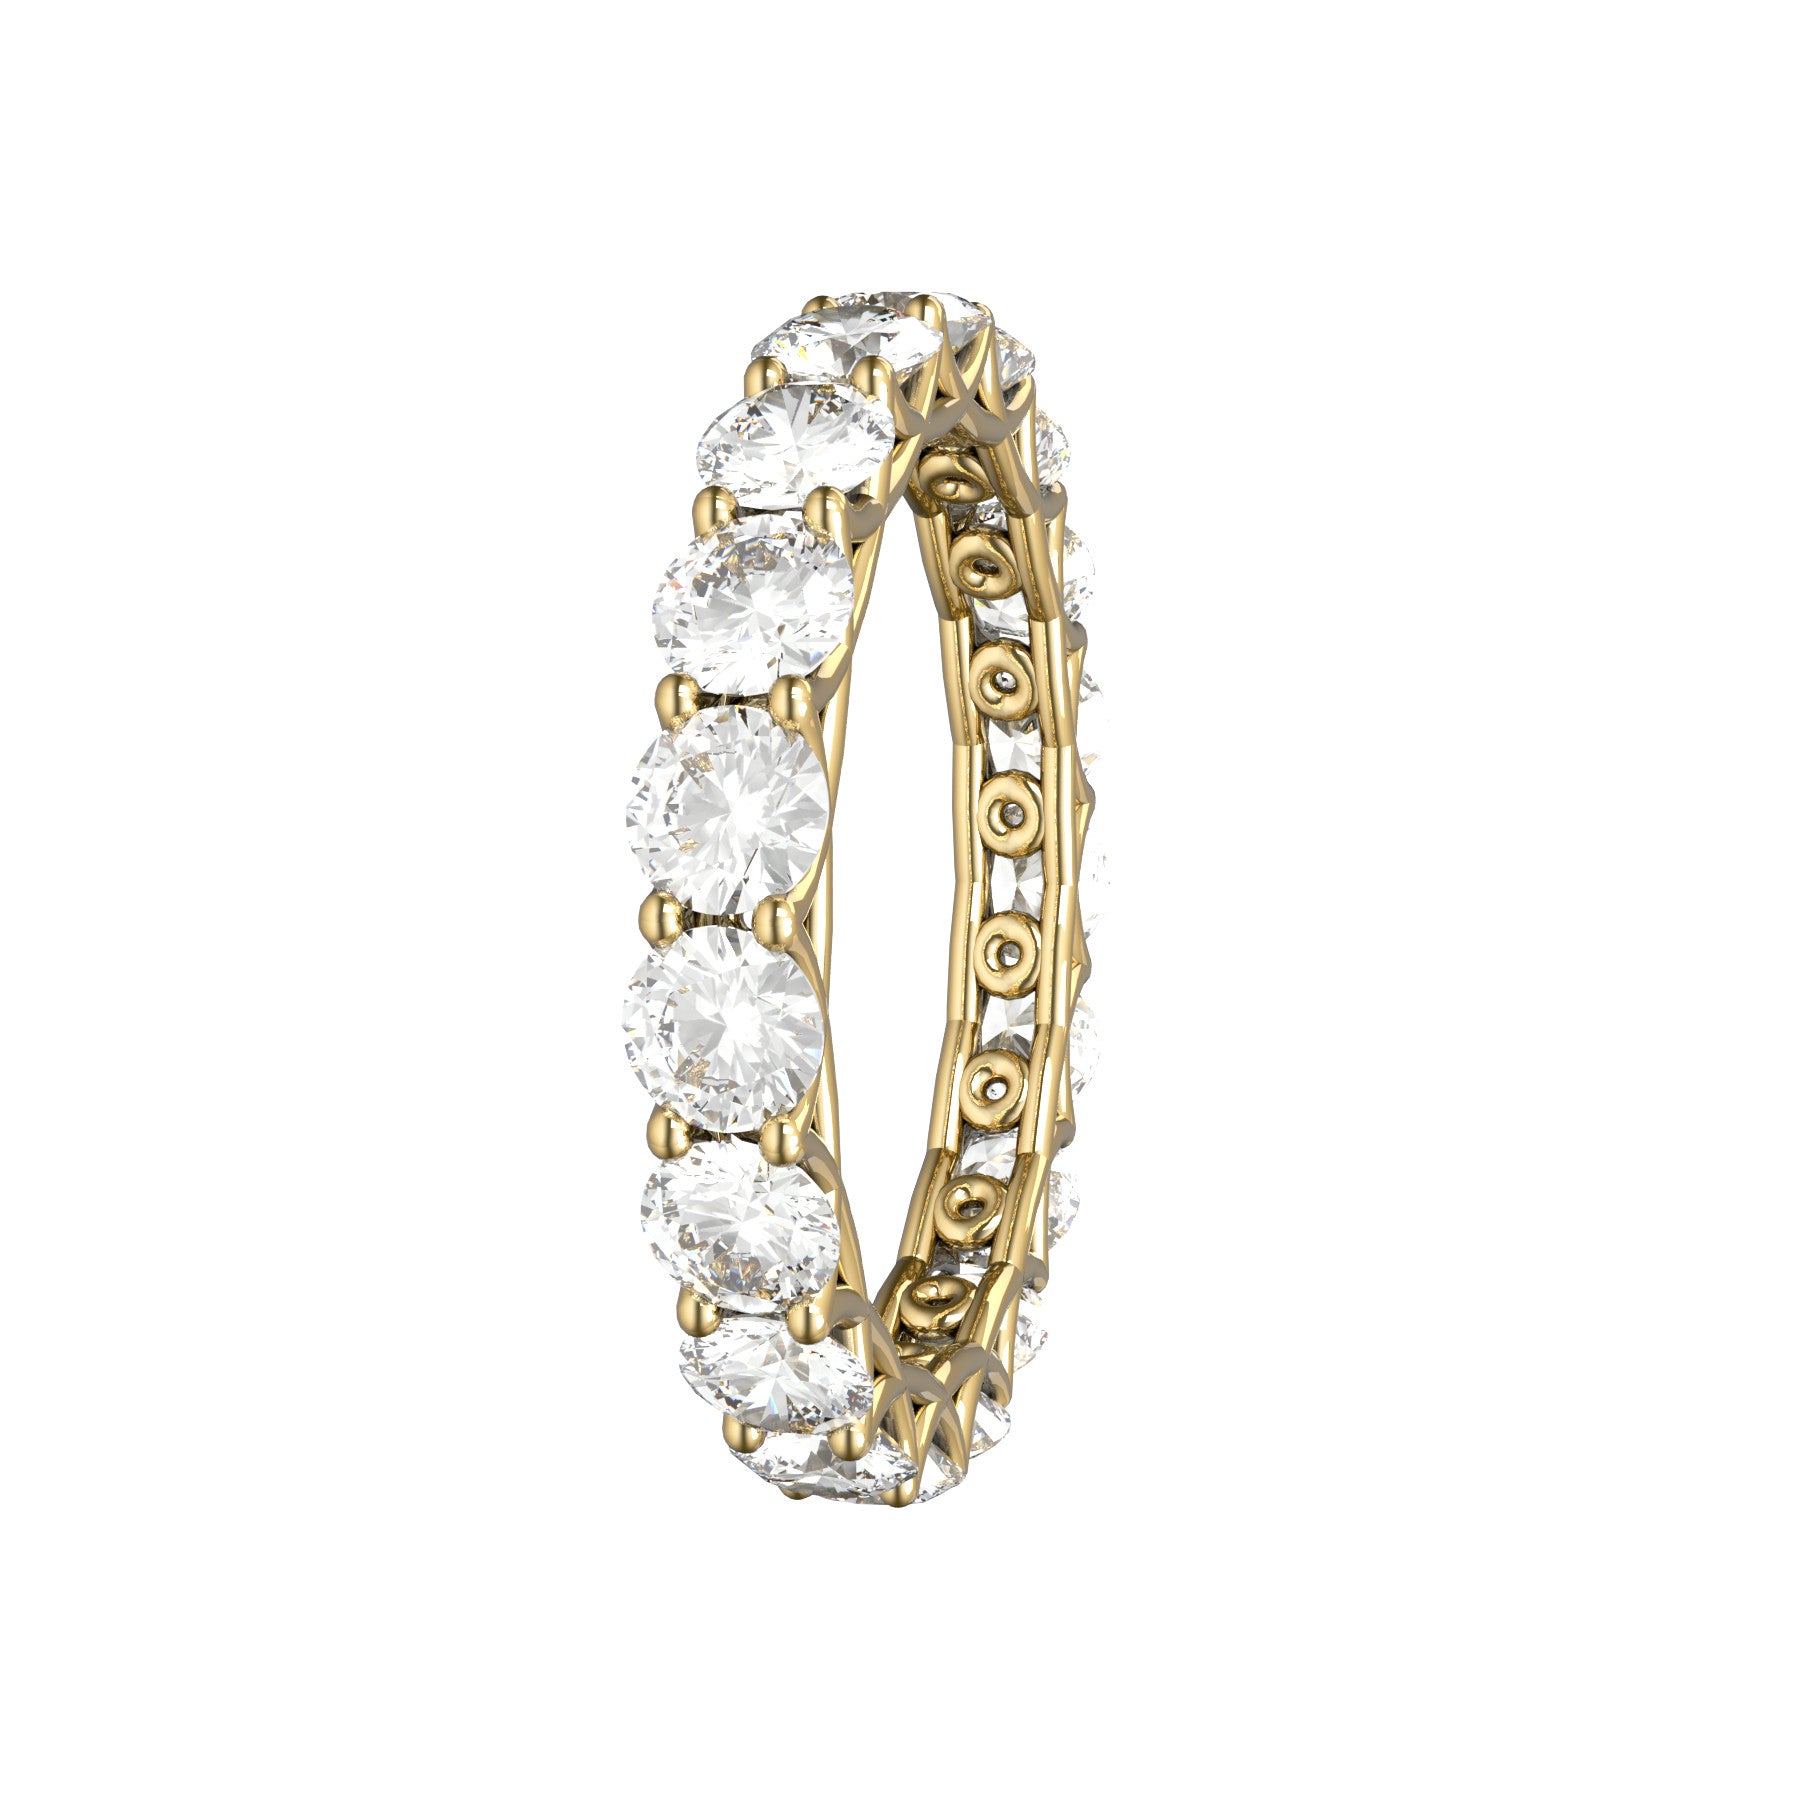 sweet hearts wedding band, 18 K yellow gold, 0,13 natural diamonds, weight about 1,90 g. (0.07 oz), width 3,25 mm